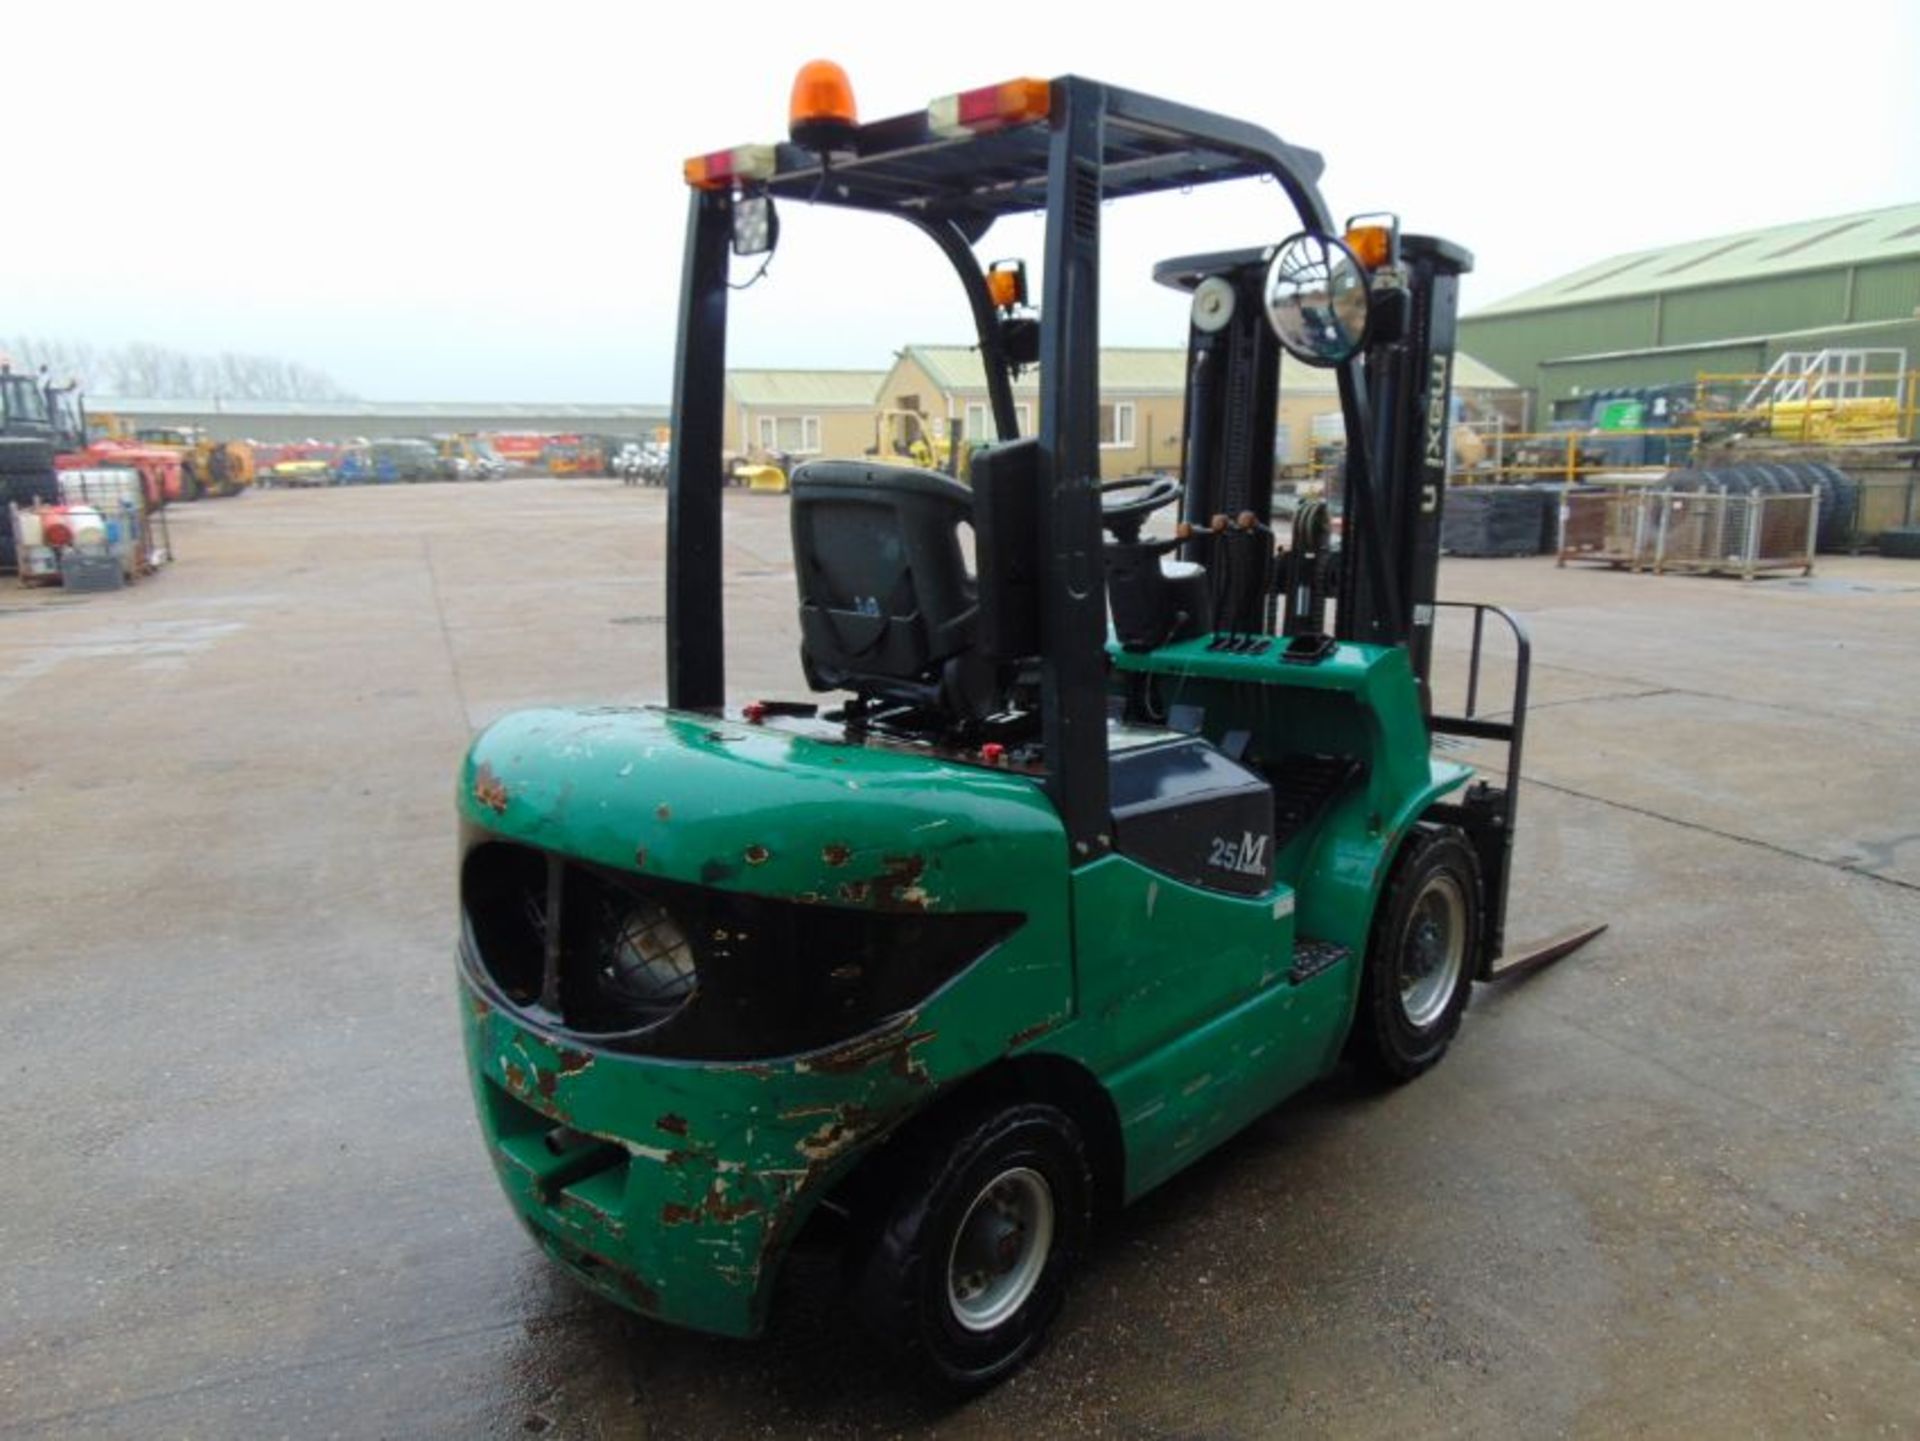 Maximal M25 2500Kg Diesel Fork Lift Truck ONLY 1,490 HOURS! - Image 9 of 22